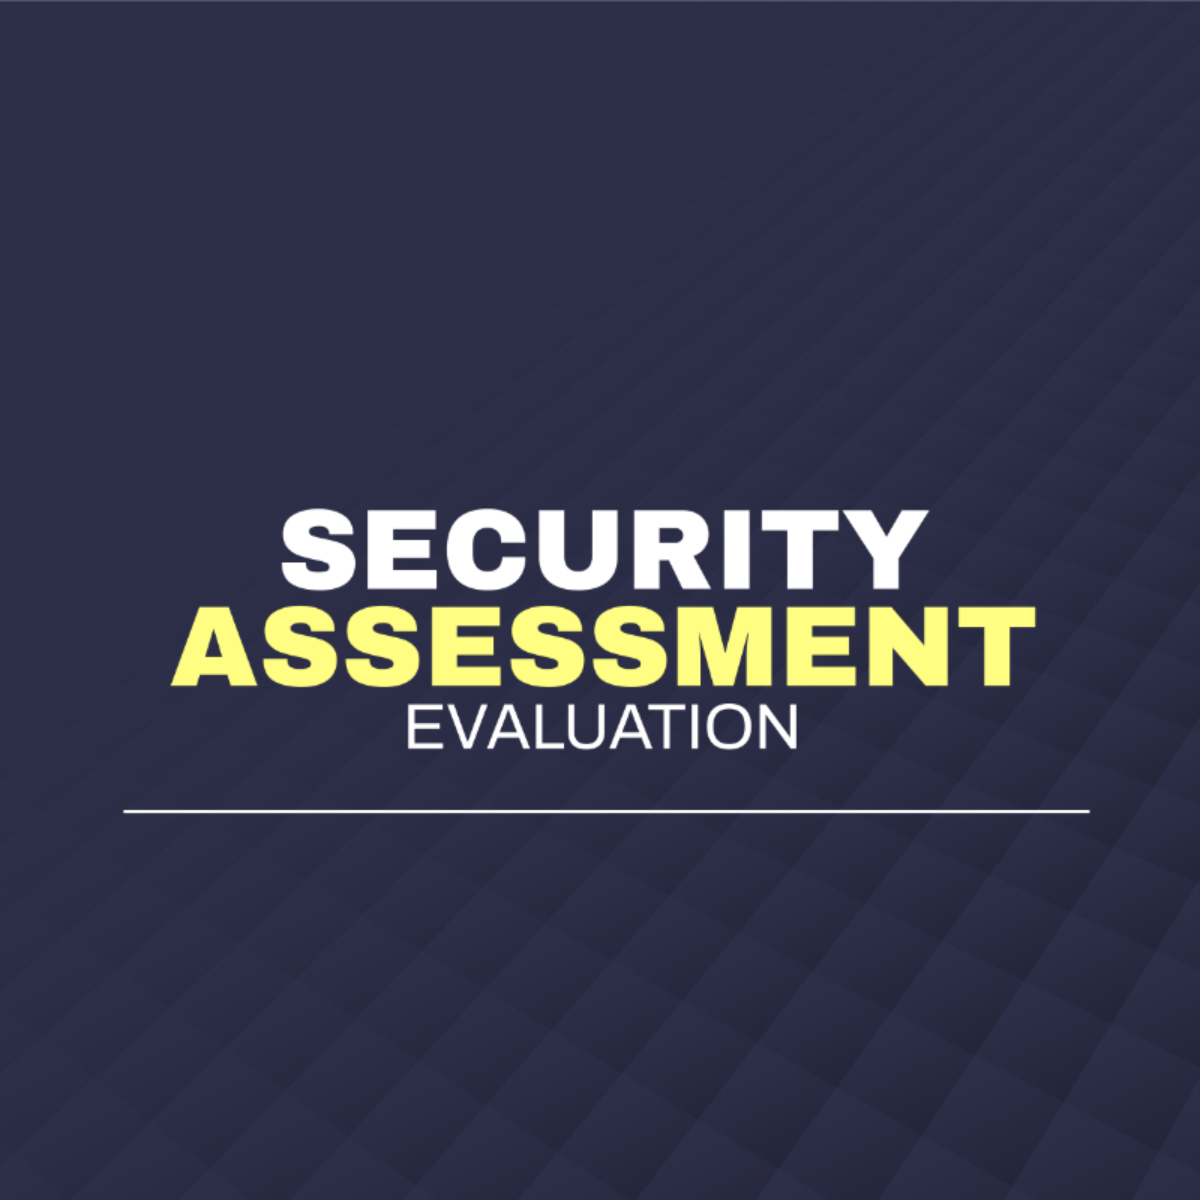 Security Assessment Evaluation Template